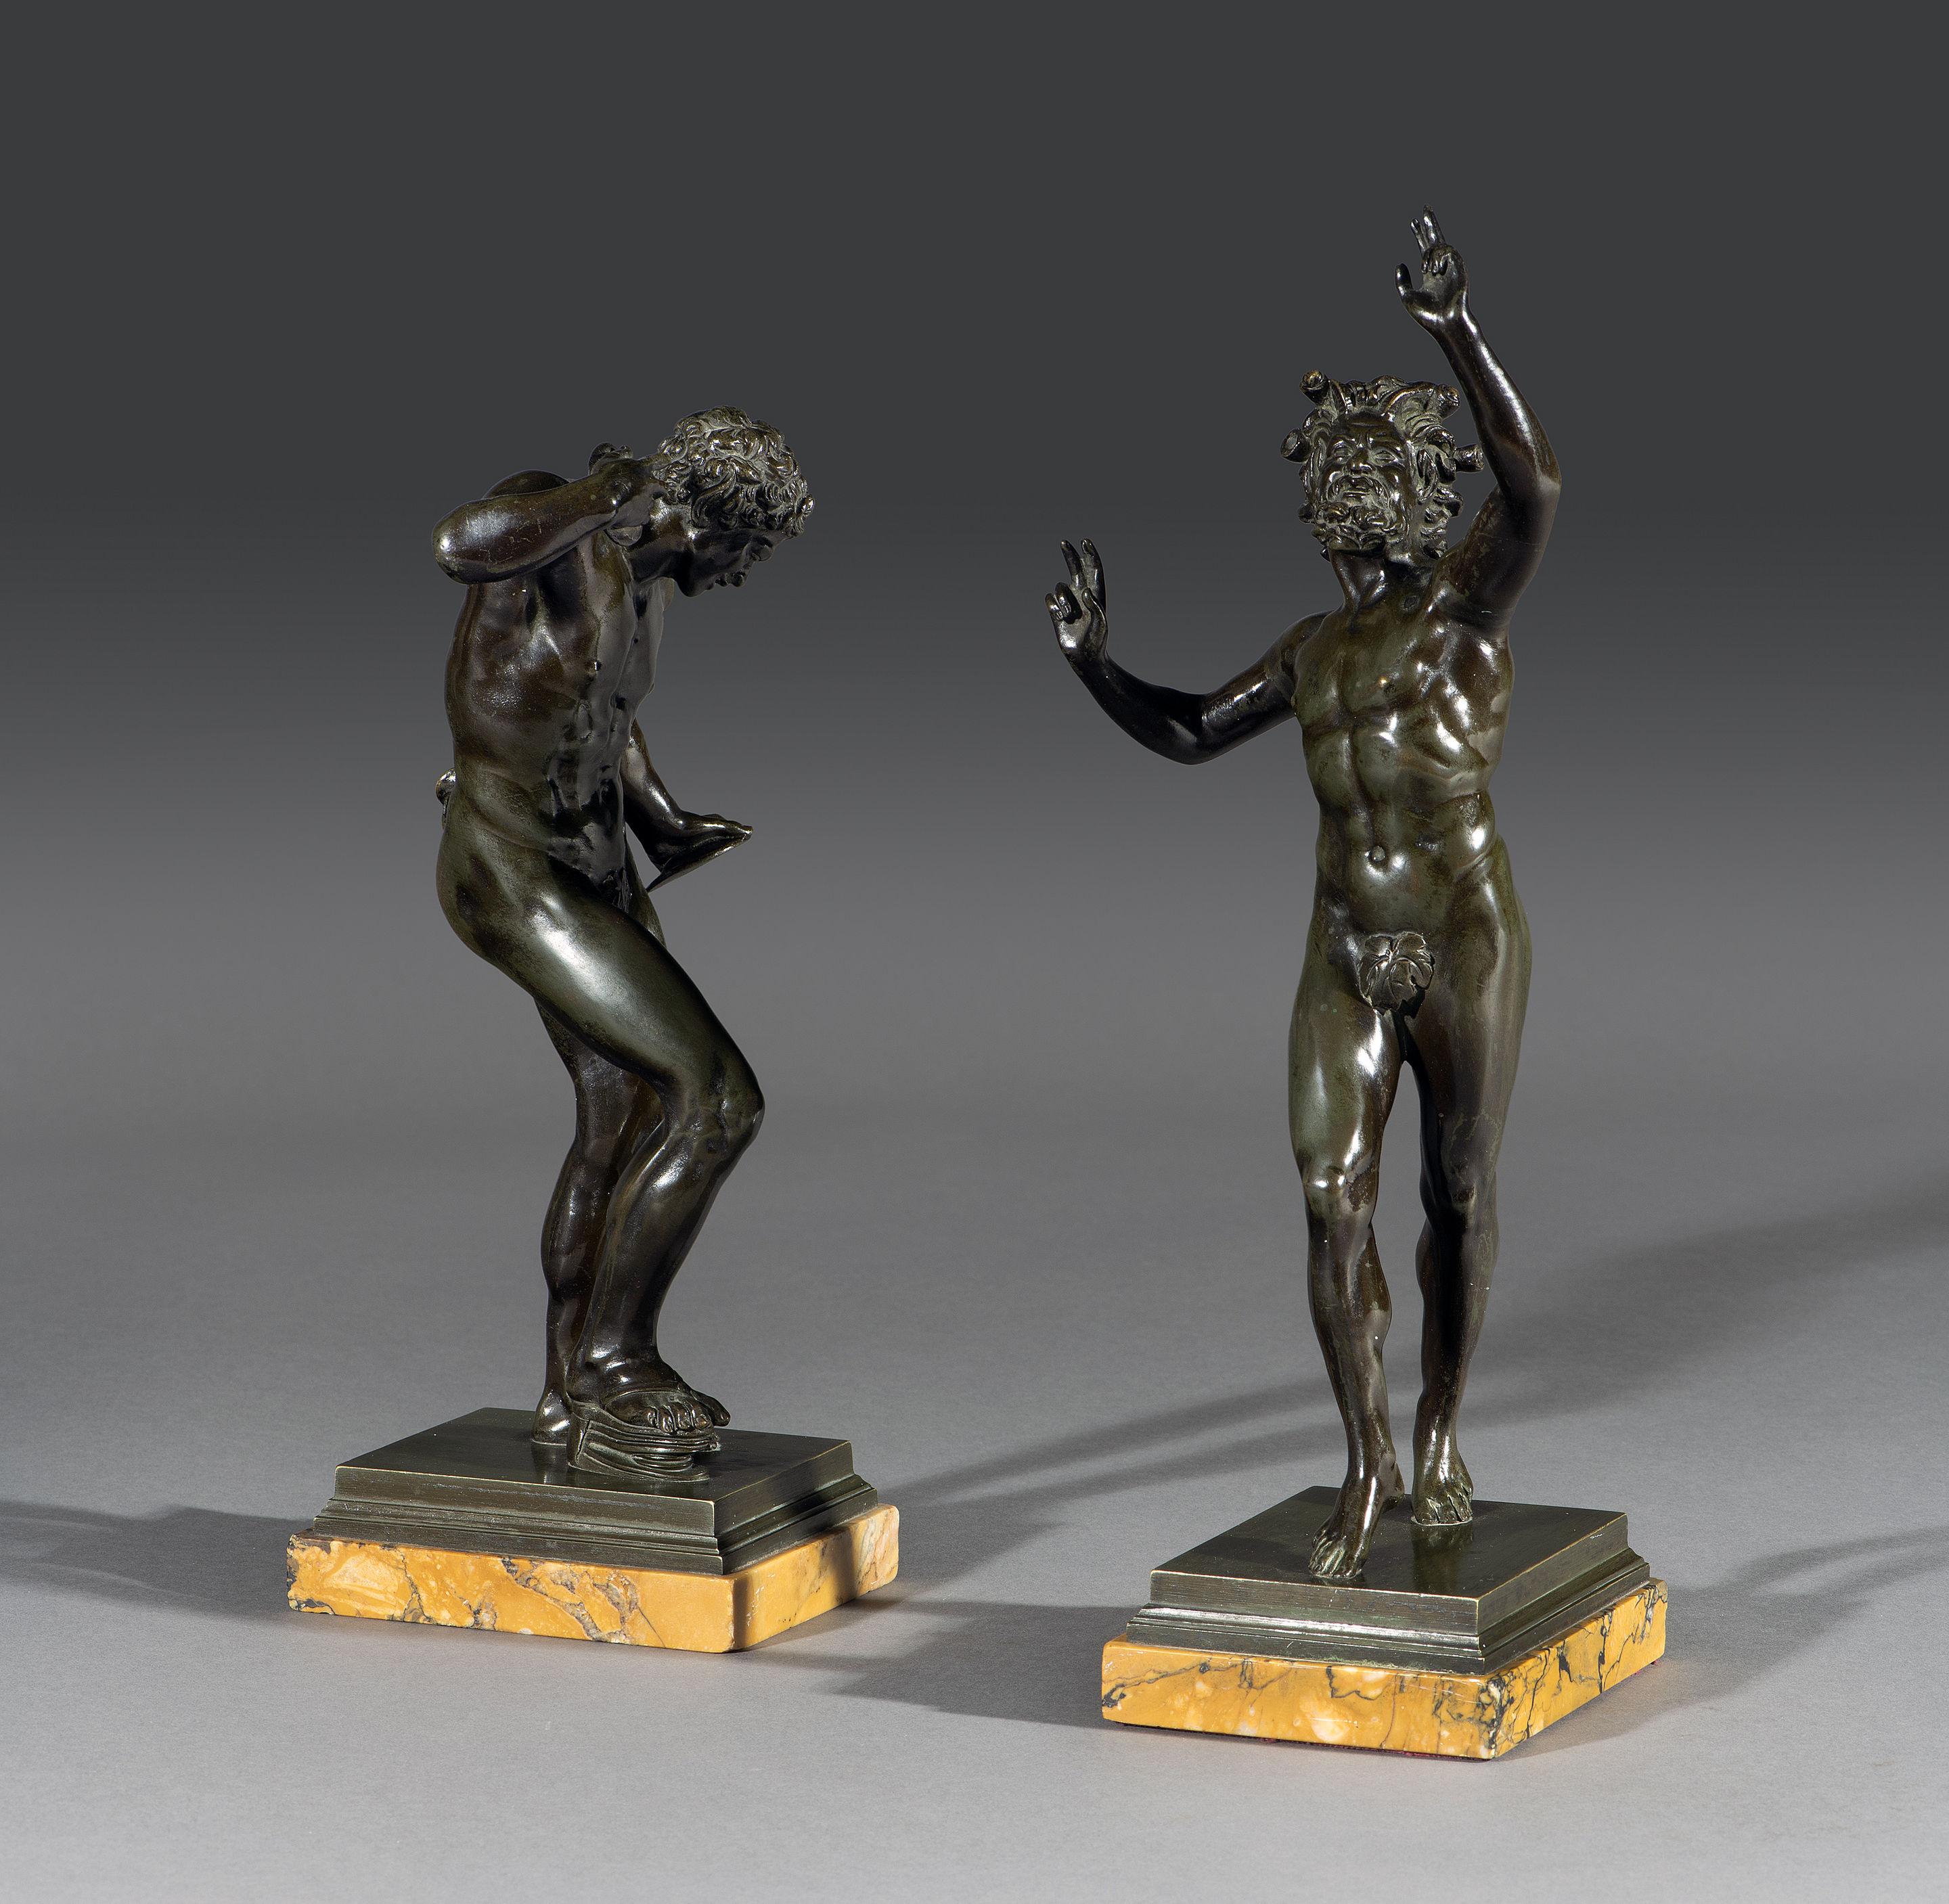 The pair of bronze 'Grand Tour' figures are after the original antique of ‘Dancing Faun with Clappers’. The darkly painted bronze statue of the iconic woodland faun from Greco-Roman mythology is depicted with pointed faun ears, tail and frenzied